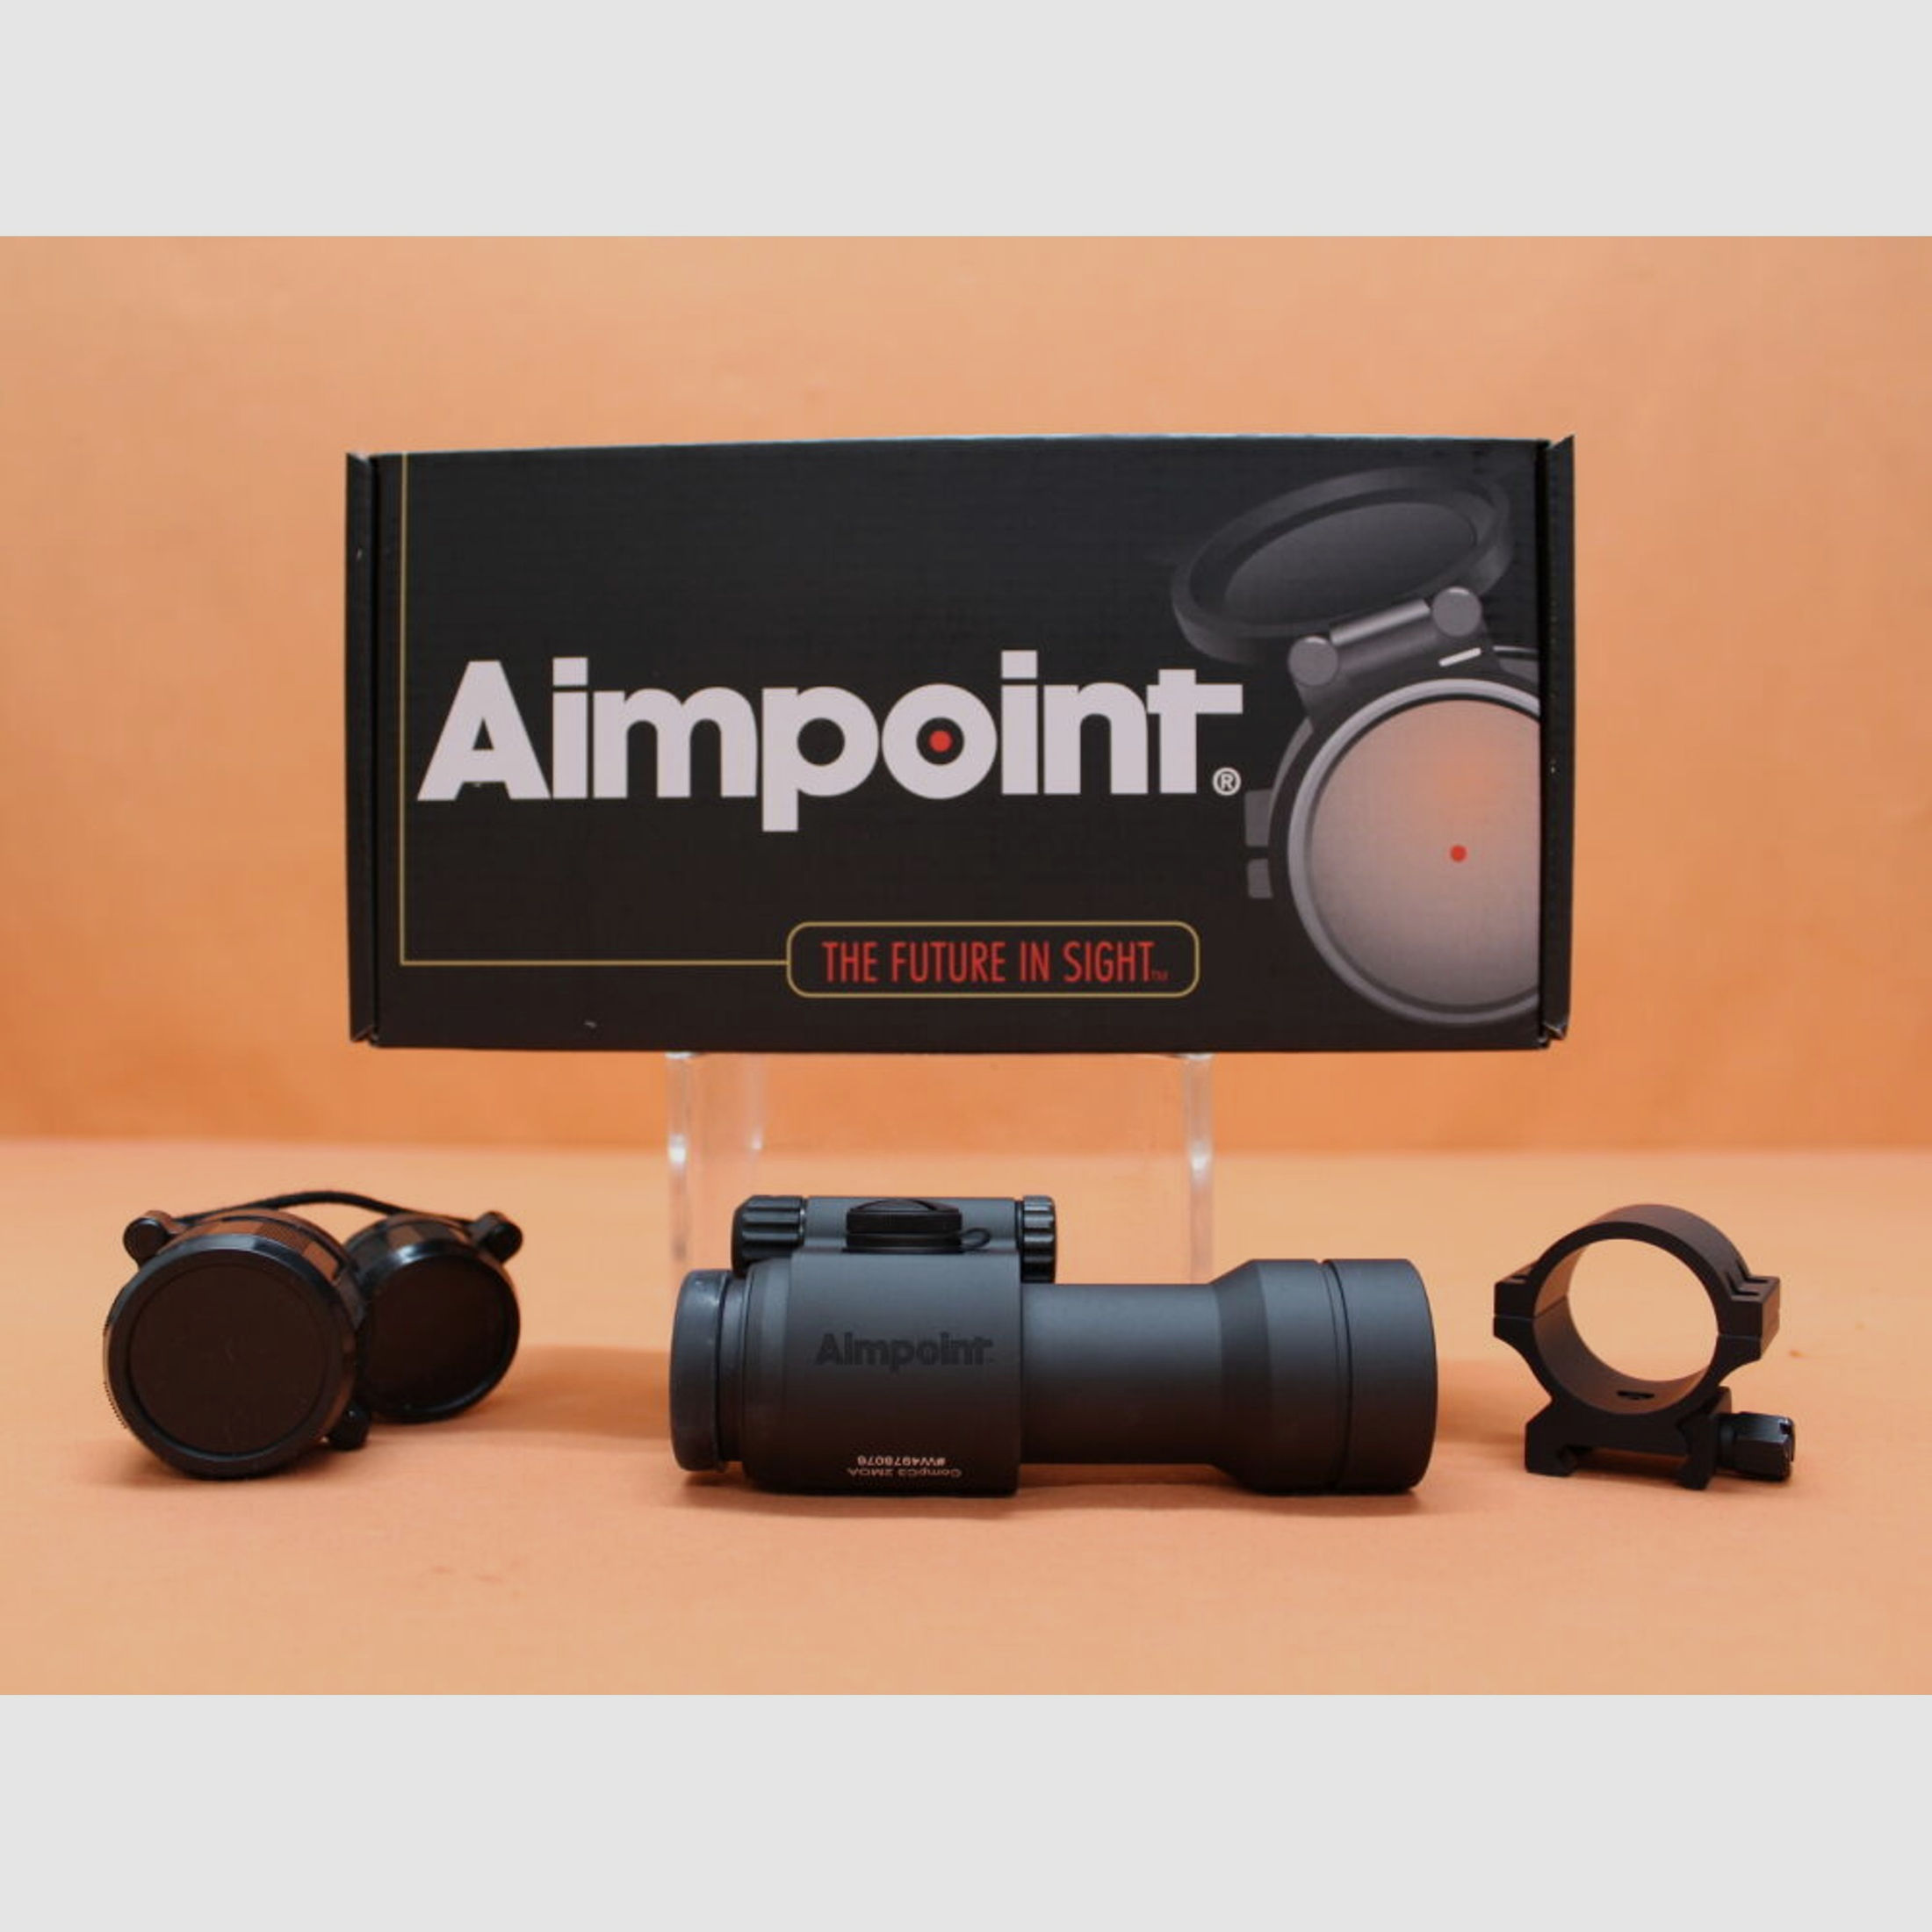 Aimpoint	 Aimpoint Comp C3 (11421) Leuchtpunktvisier 2MOA Dot (6cm auf 100m)/ Montagering f. Weaver/ Picatinny